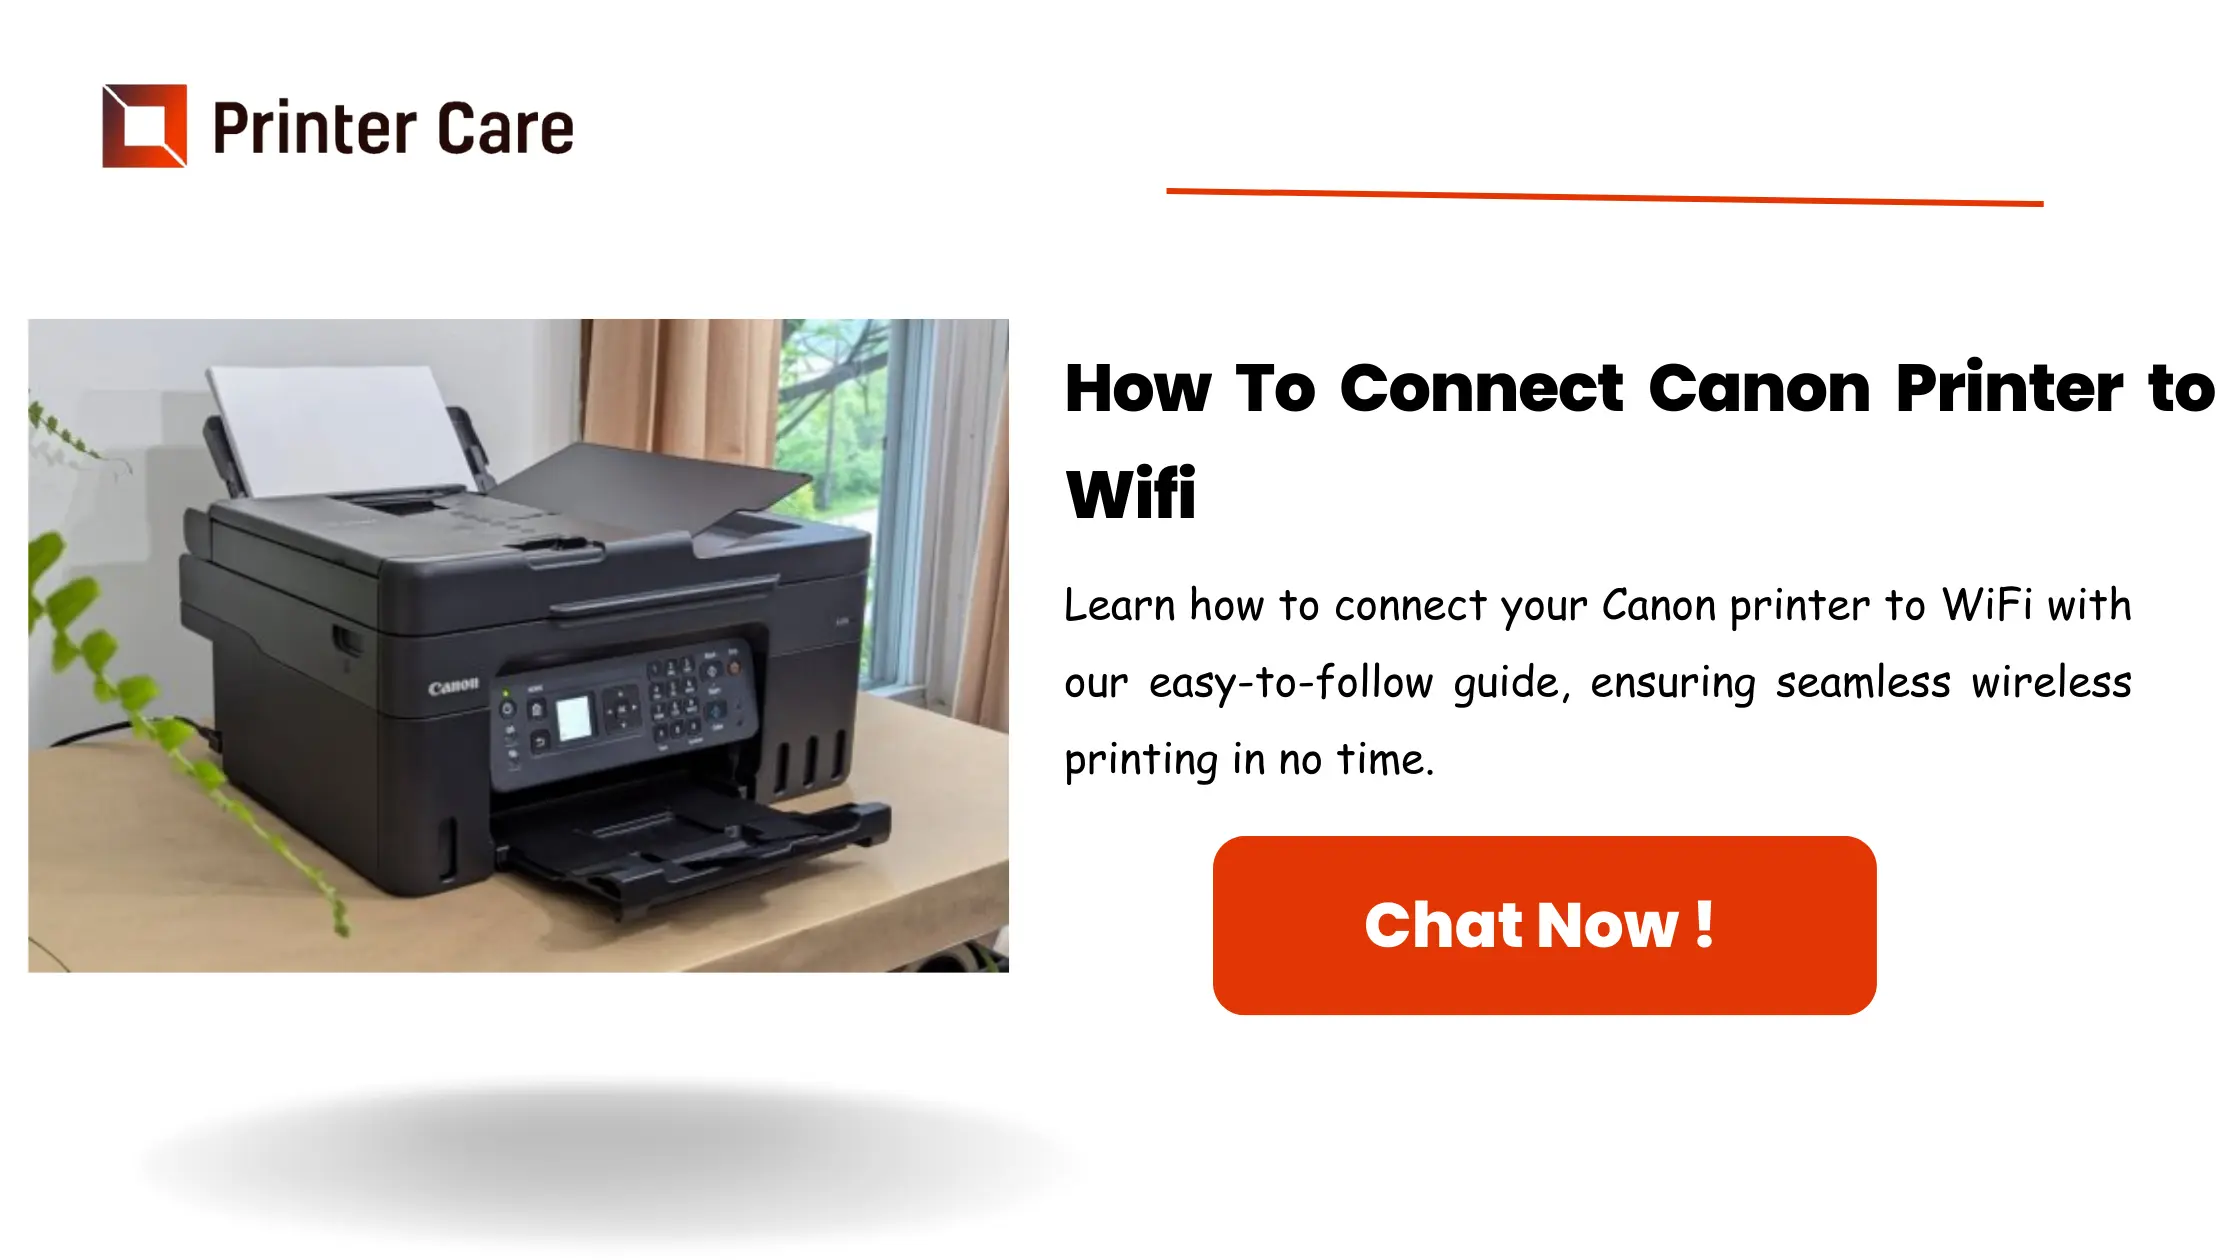 How To Connect Canon Printer to Wifi